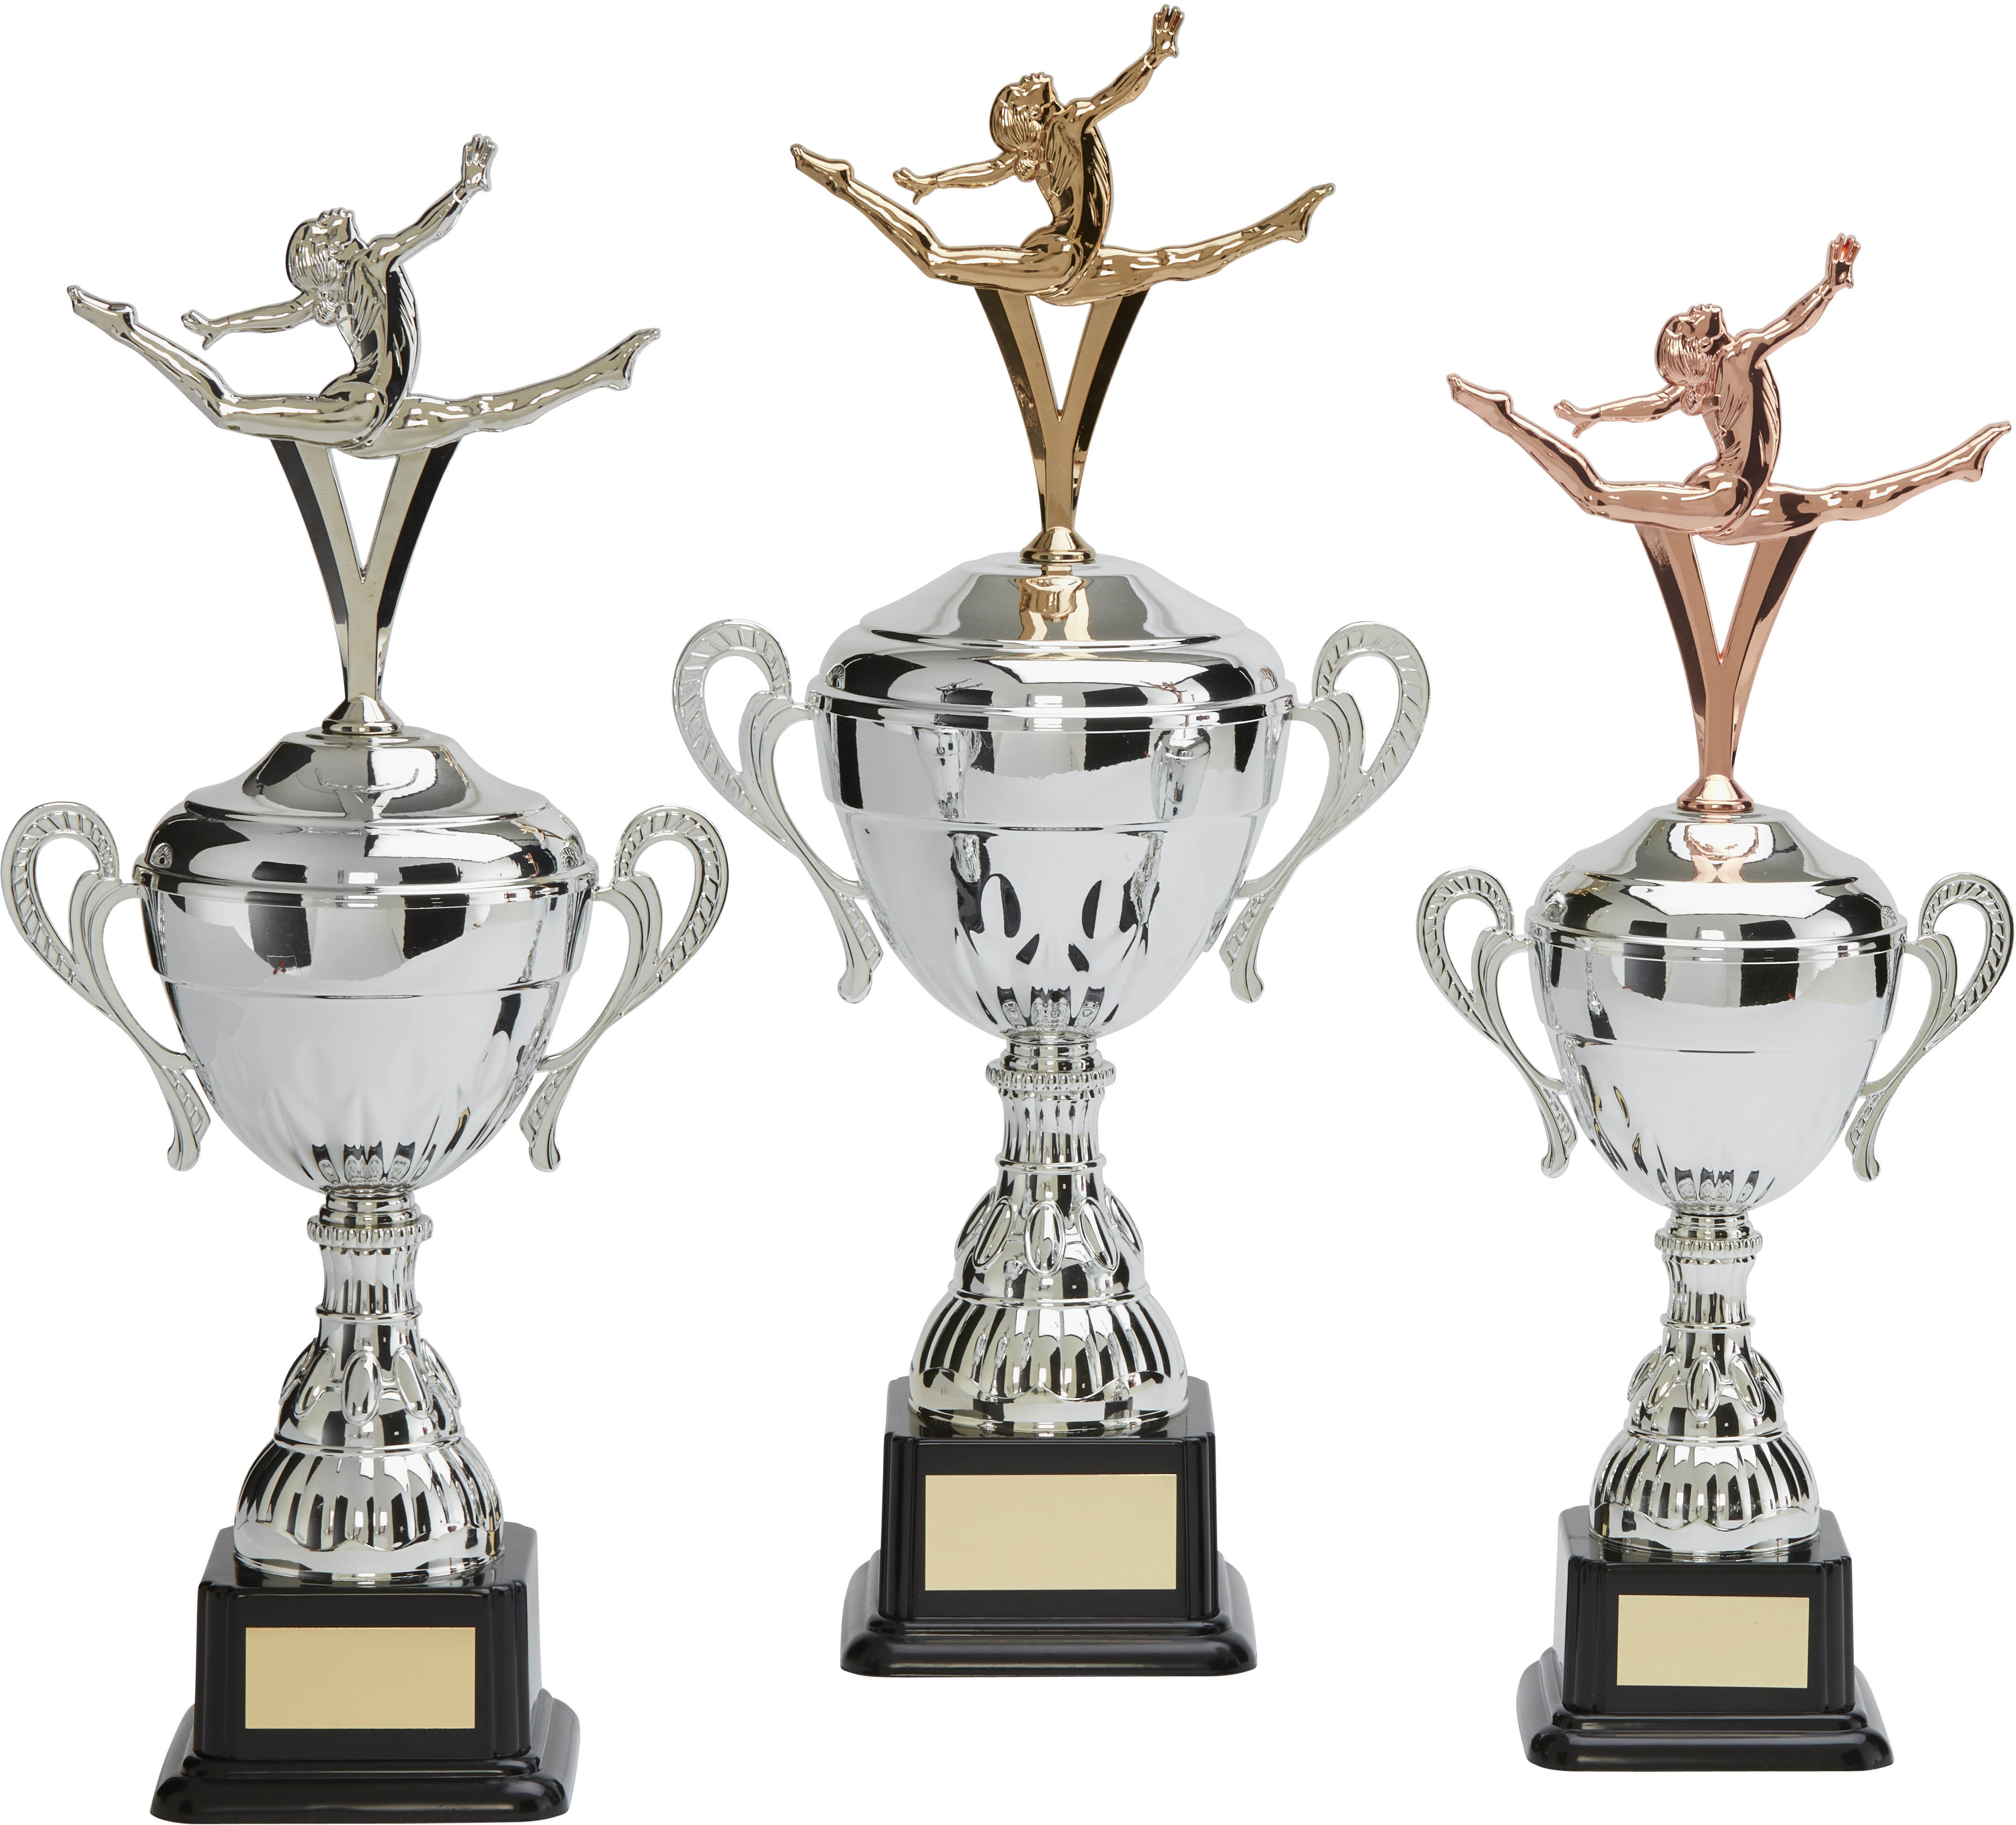 competitive and regional gymnastic trophies